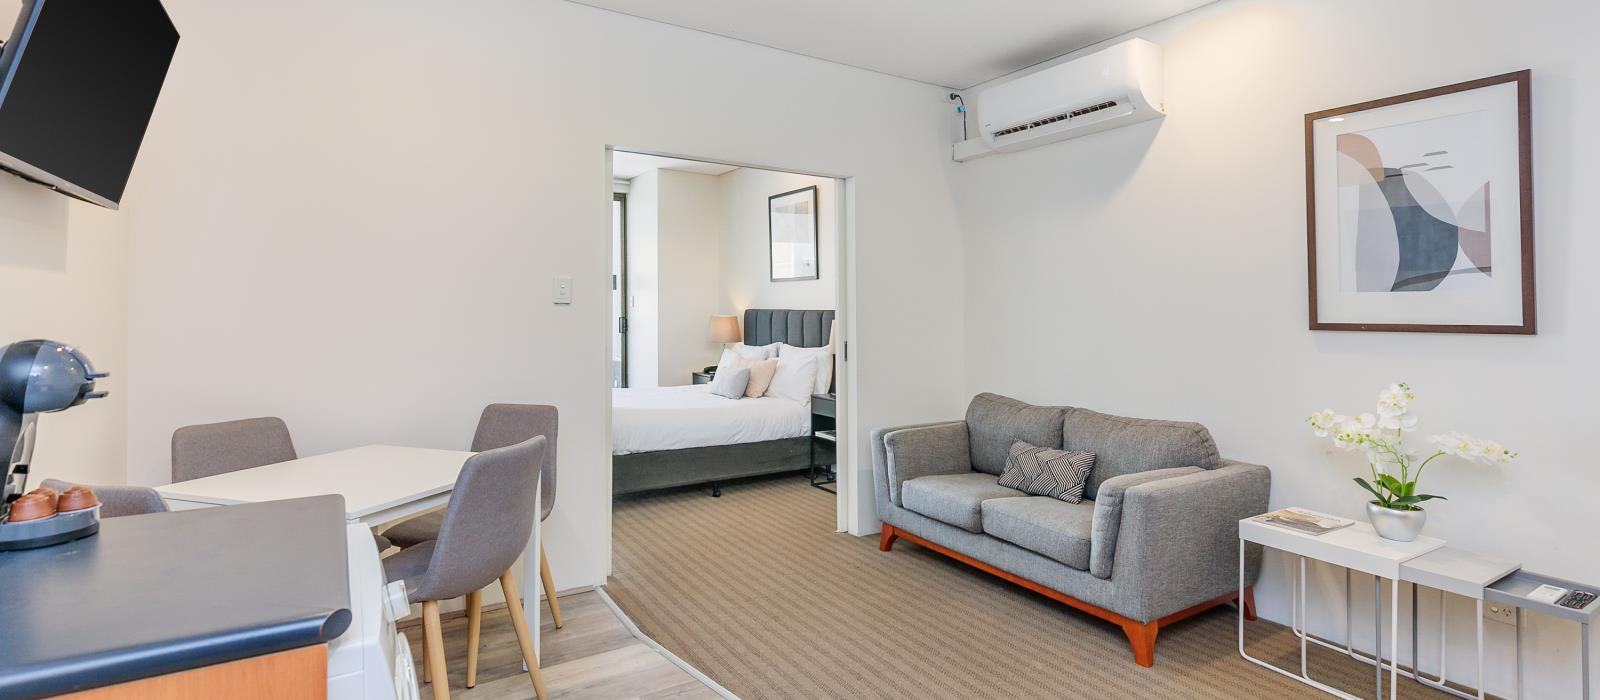 Lounge and Bedroom from kitchen - Superior Two Bedroom Serviced Apartment - All Suites Perth